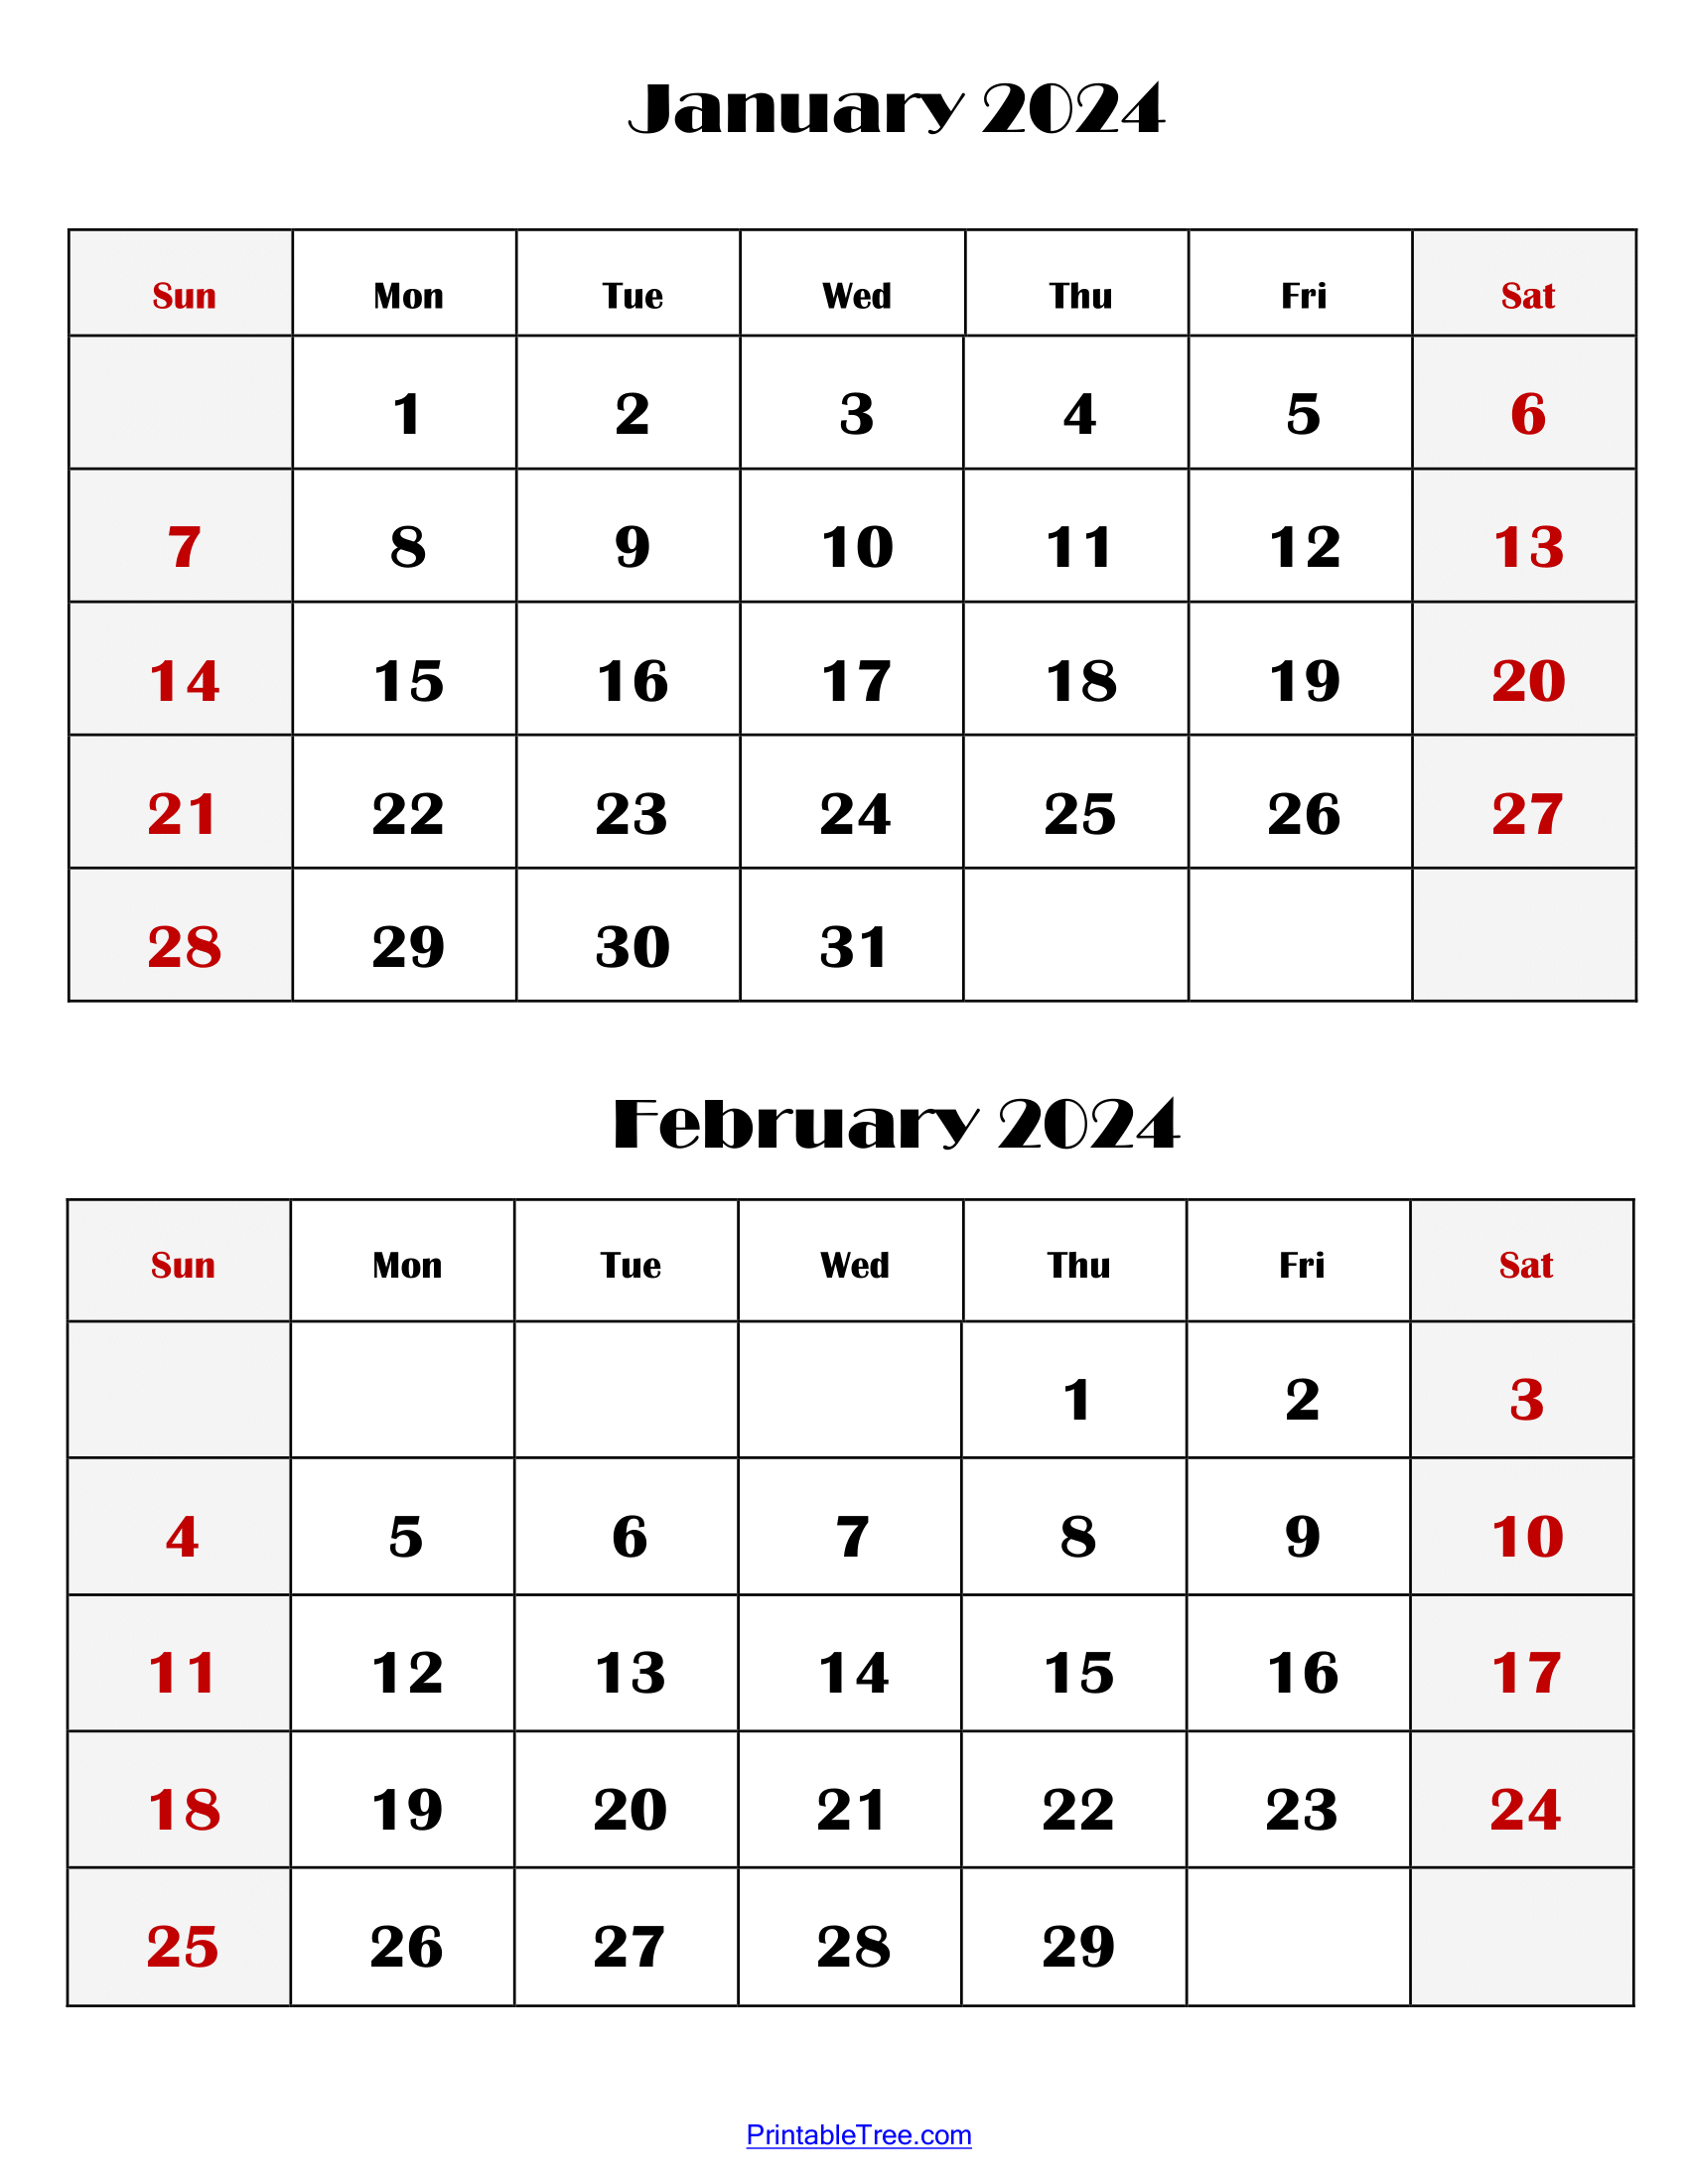 Two Months Calendar 2024 Printable Pdf | Double Month Calendar inside Free Printable Calendar 2024 2 Months Per Page With Holidays